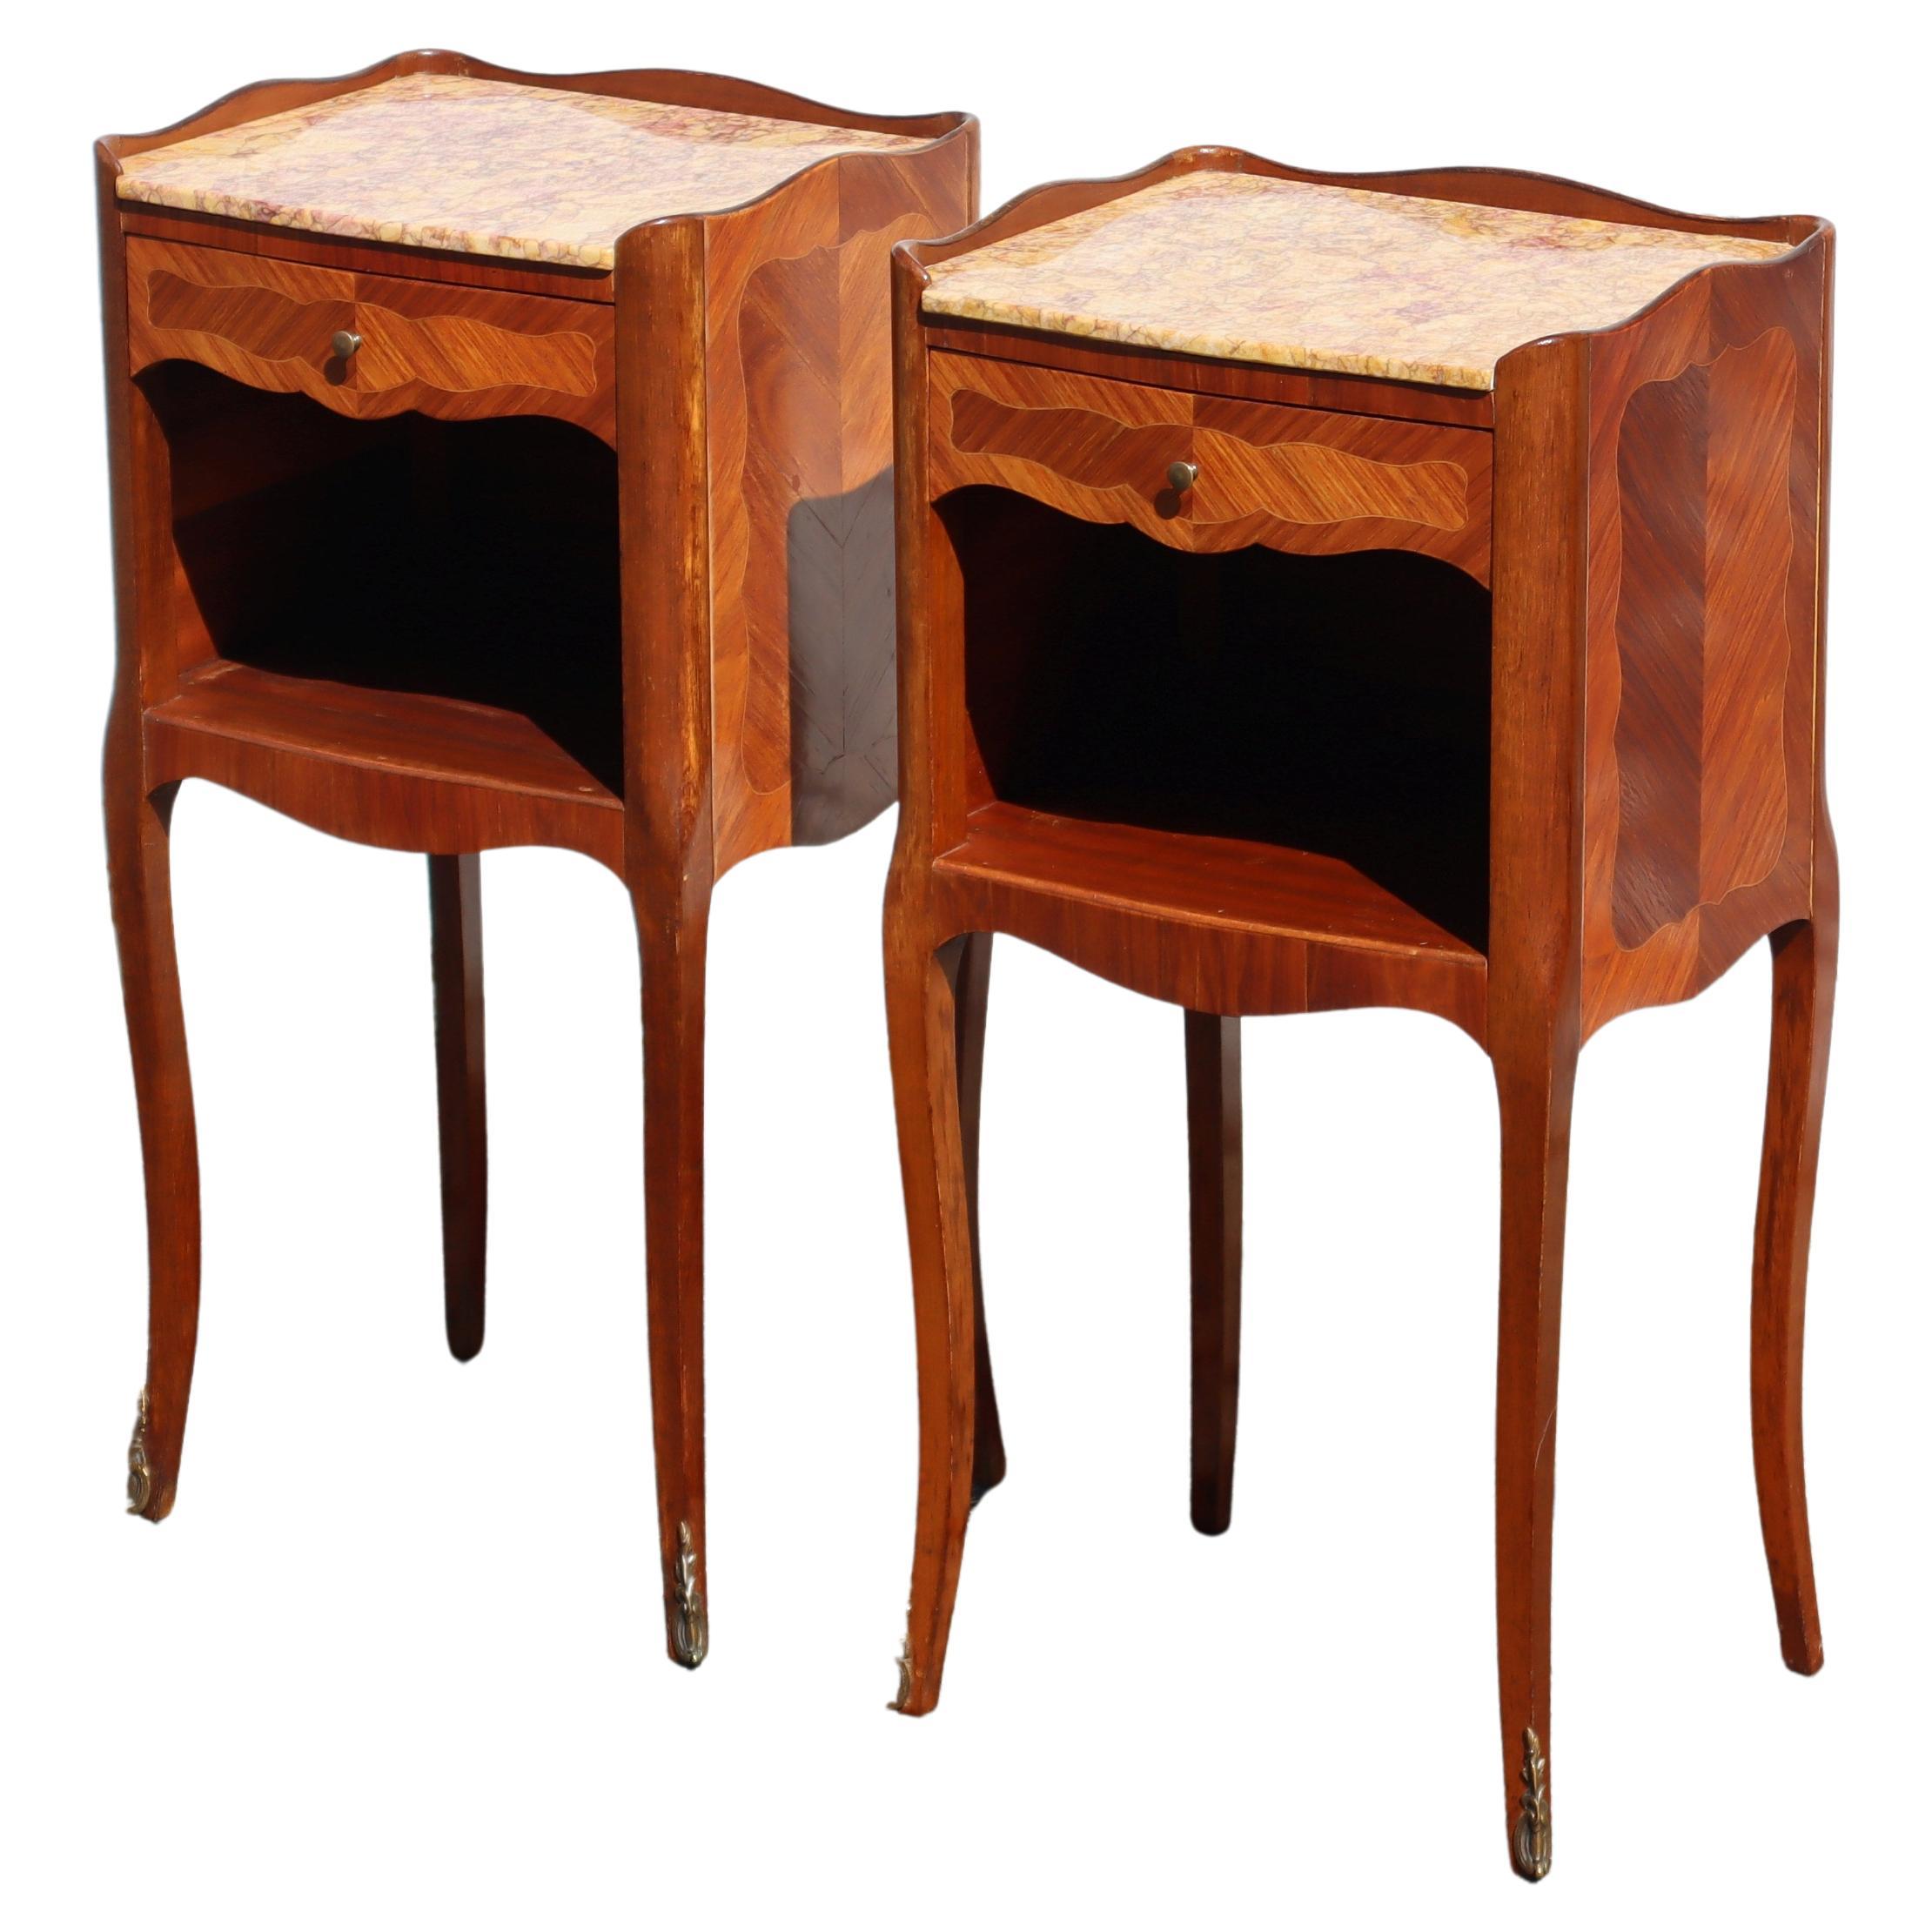 2 French Antique Rosewood Marquetry Nightstands-Pair Marble&Wood Night Tables 